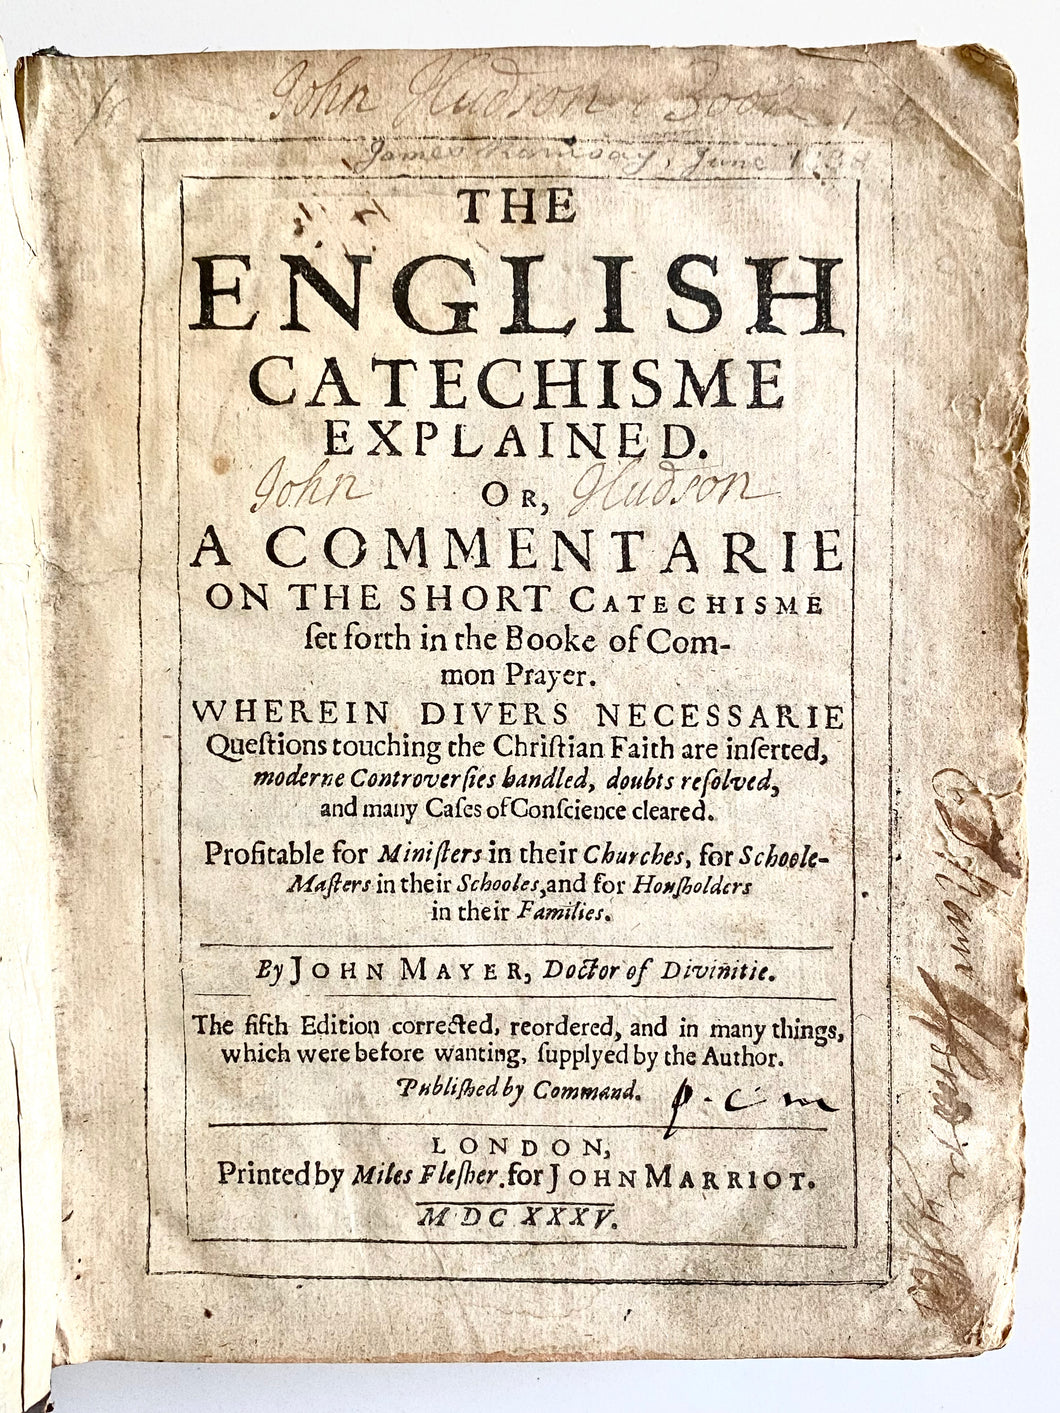 1635 JOHN MAYER. A Puritan Exposition of the Shorter Catechism. Rare - Spurgeon Recommended!